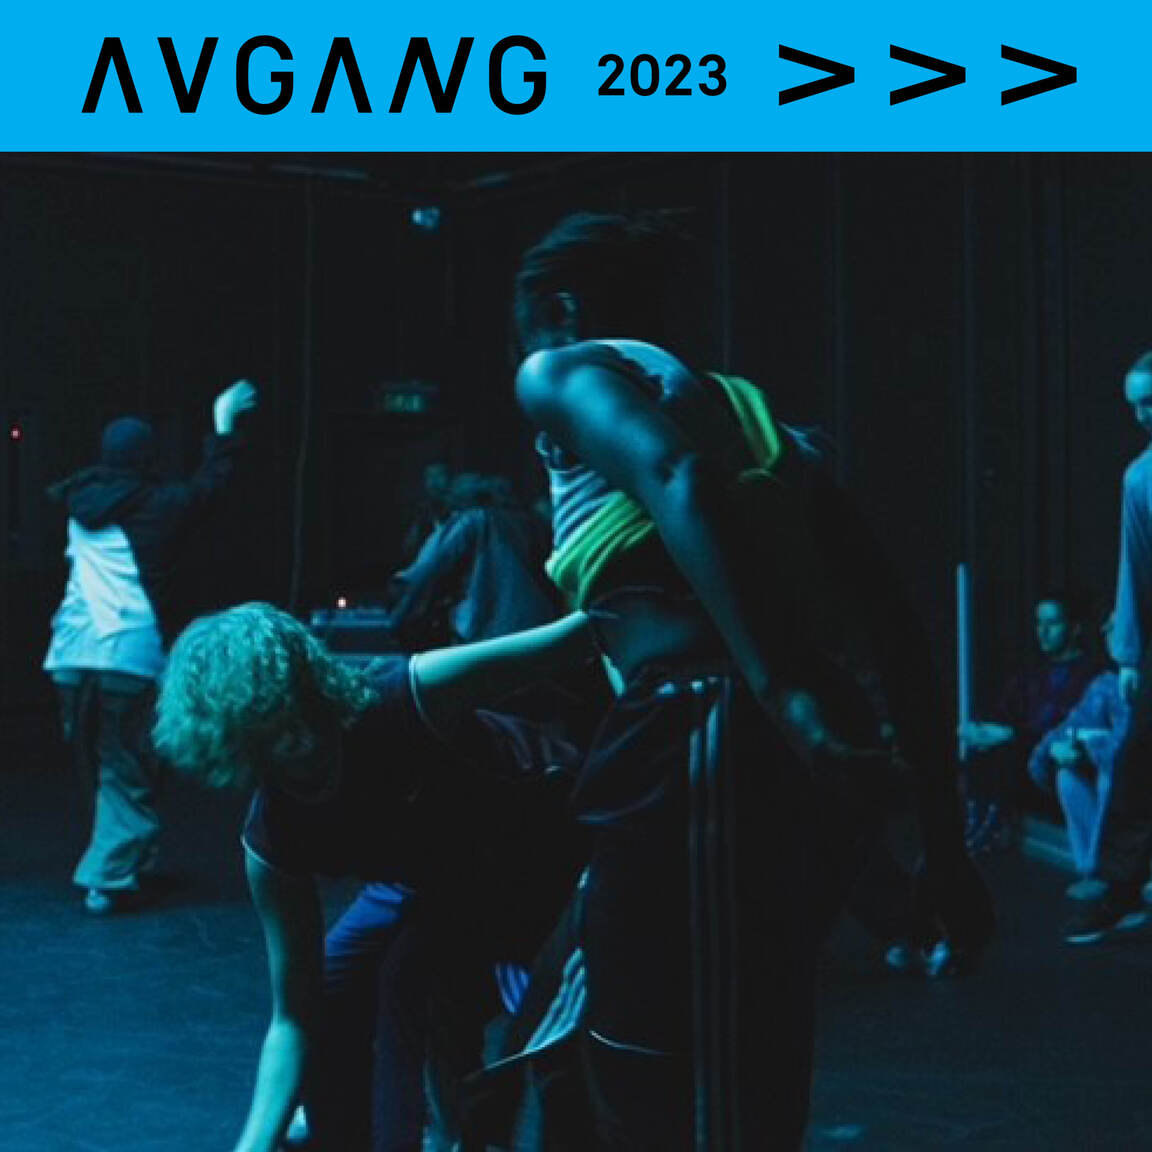 Avgang 2023: The way out is the way in